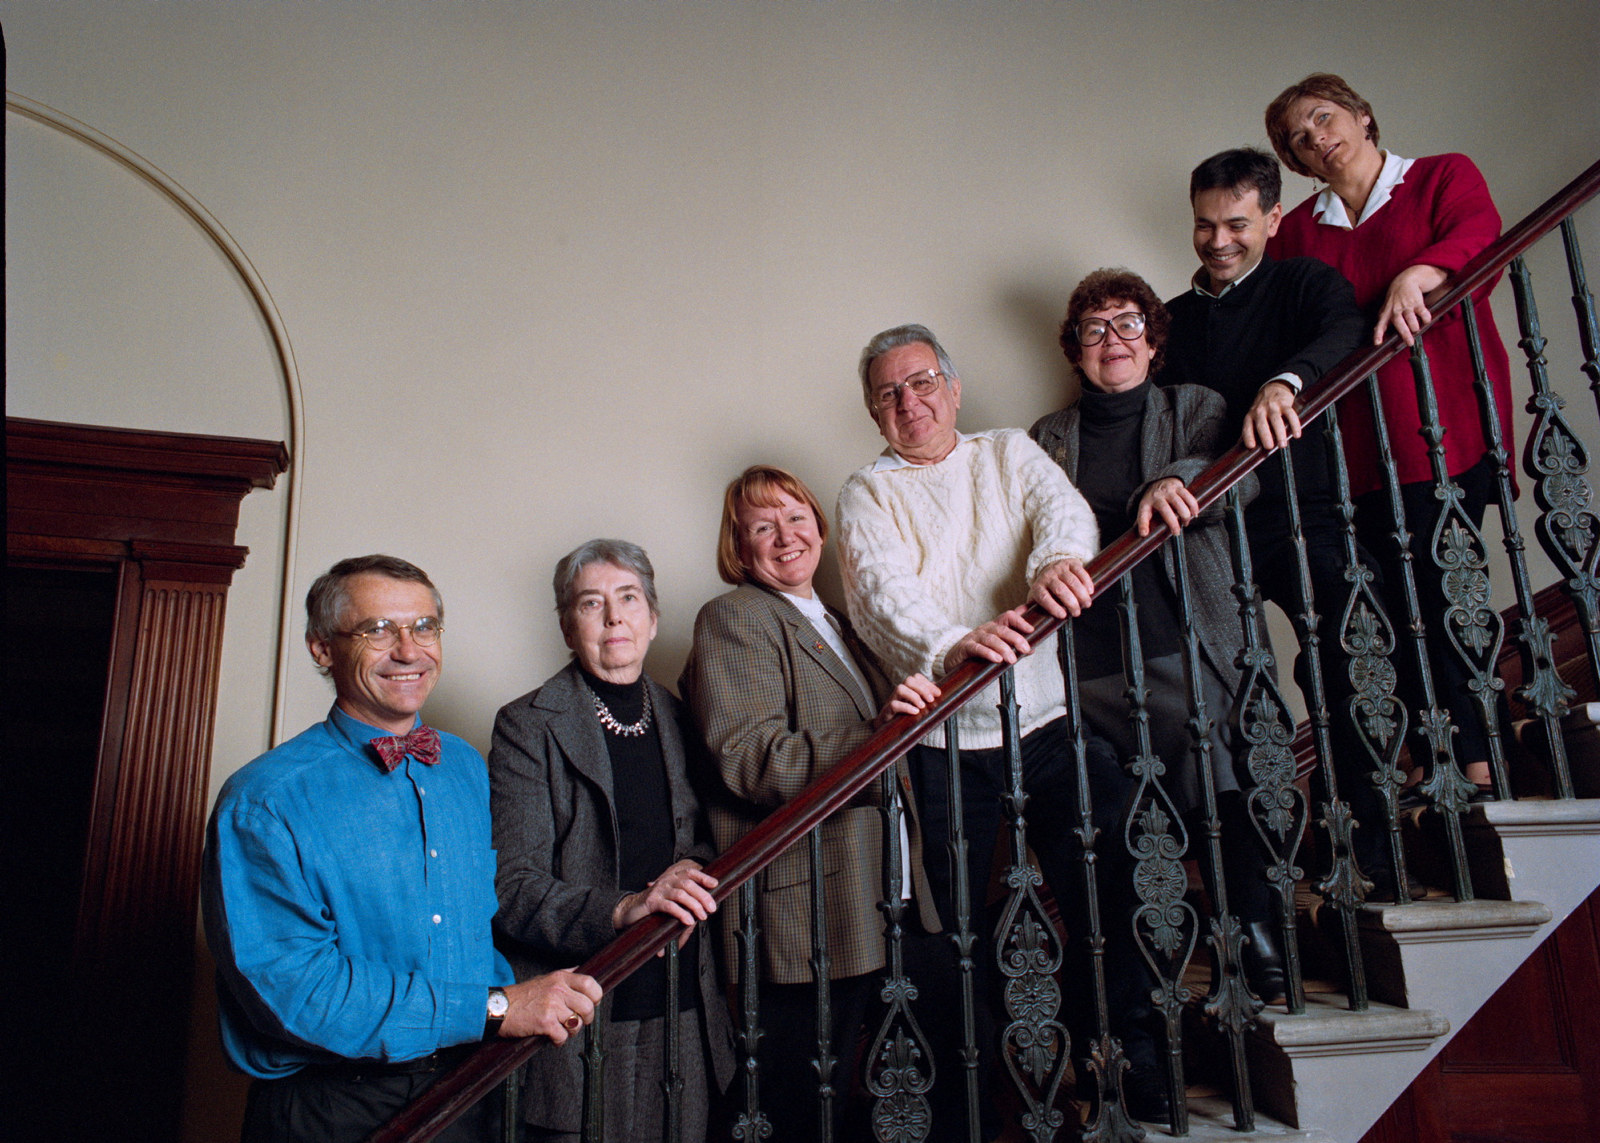 Group of people standing on staircase. Jack is in white shirt in centre of image.